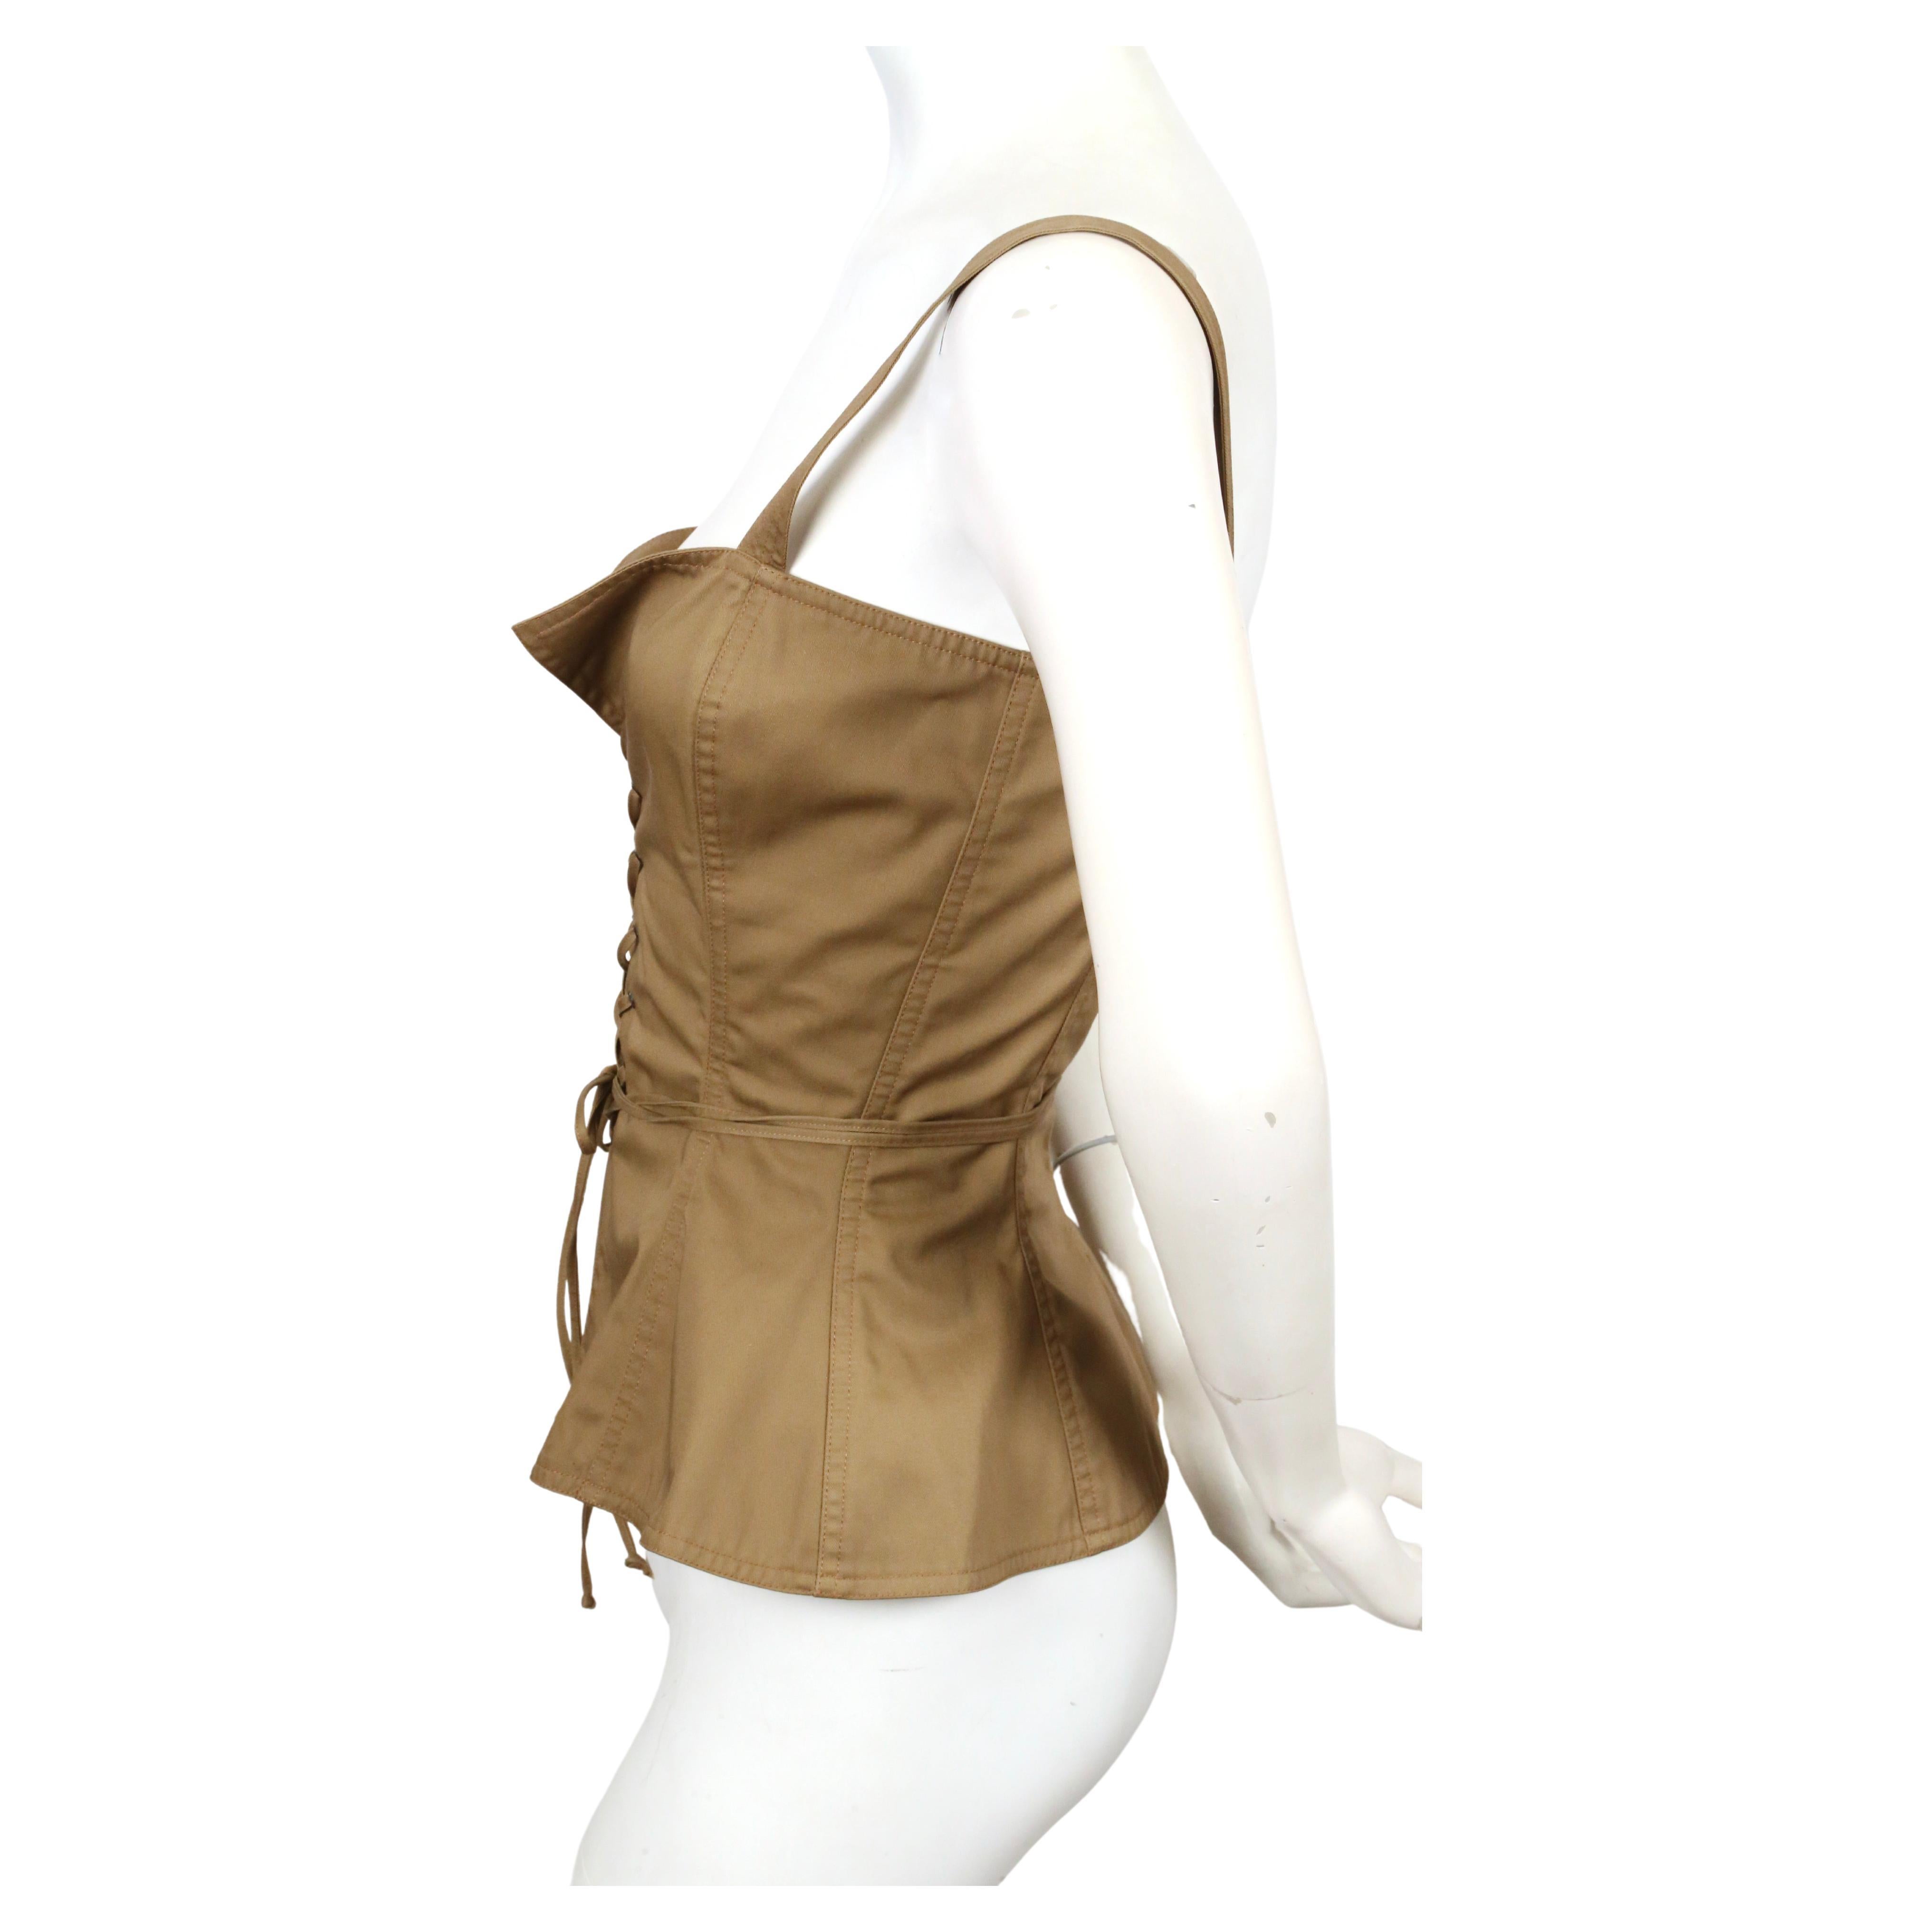 Tan, cotton bustier top with metal grommets designed by Yves Saint Laurent dating to 1977 exactly as seen on the runway and in numerous editorials including one of Farrah Fawcett. No size is indicated however this best fits a size 2 to 4 (maximum